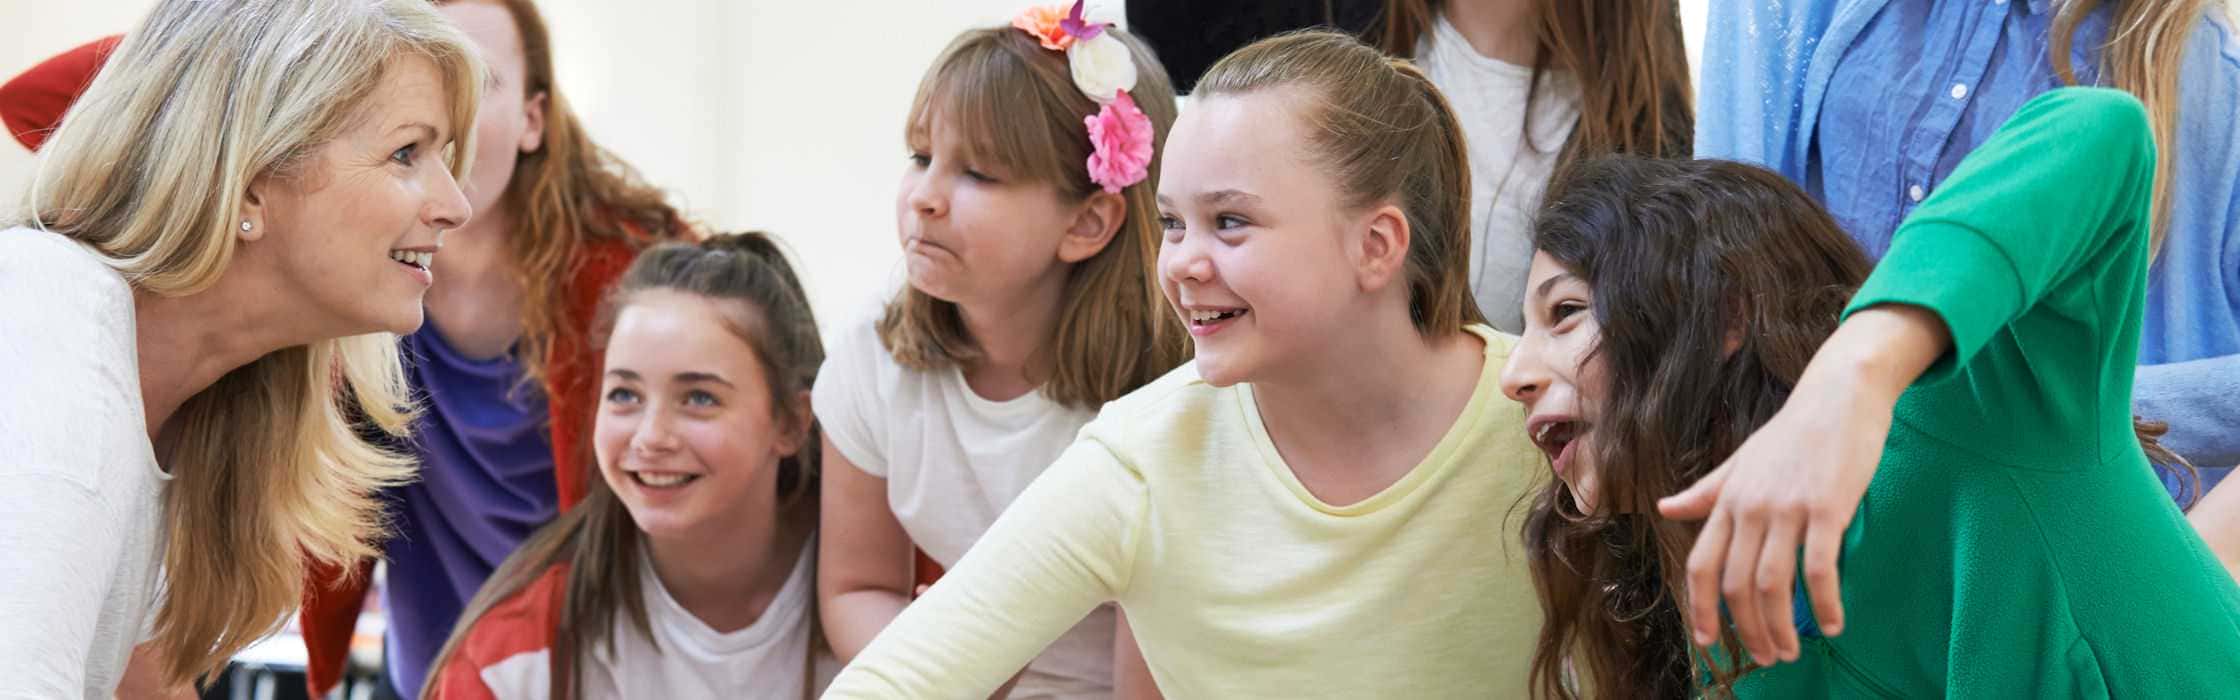 Family Workshops & Classes in Liverpool